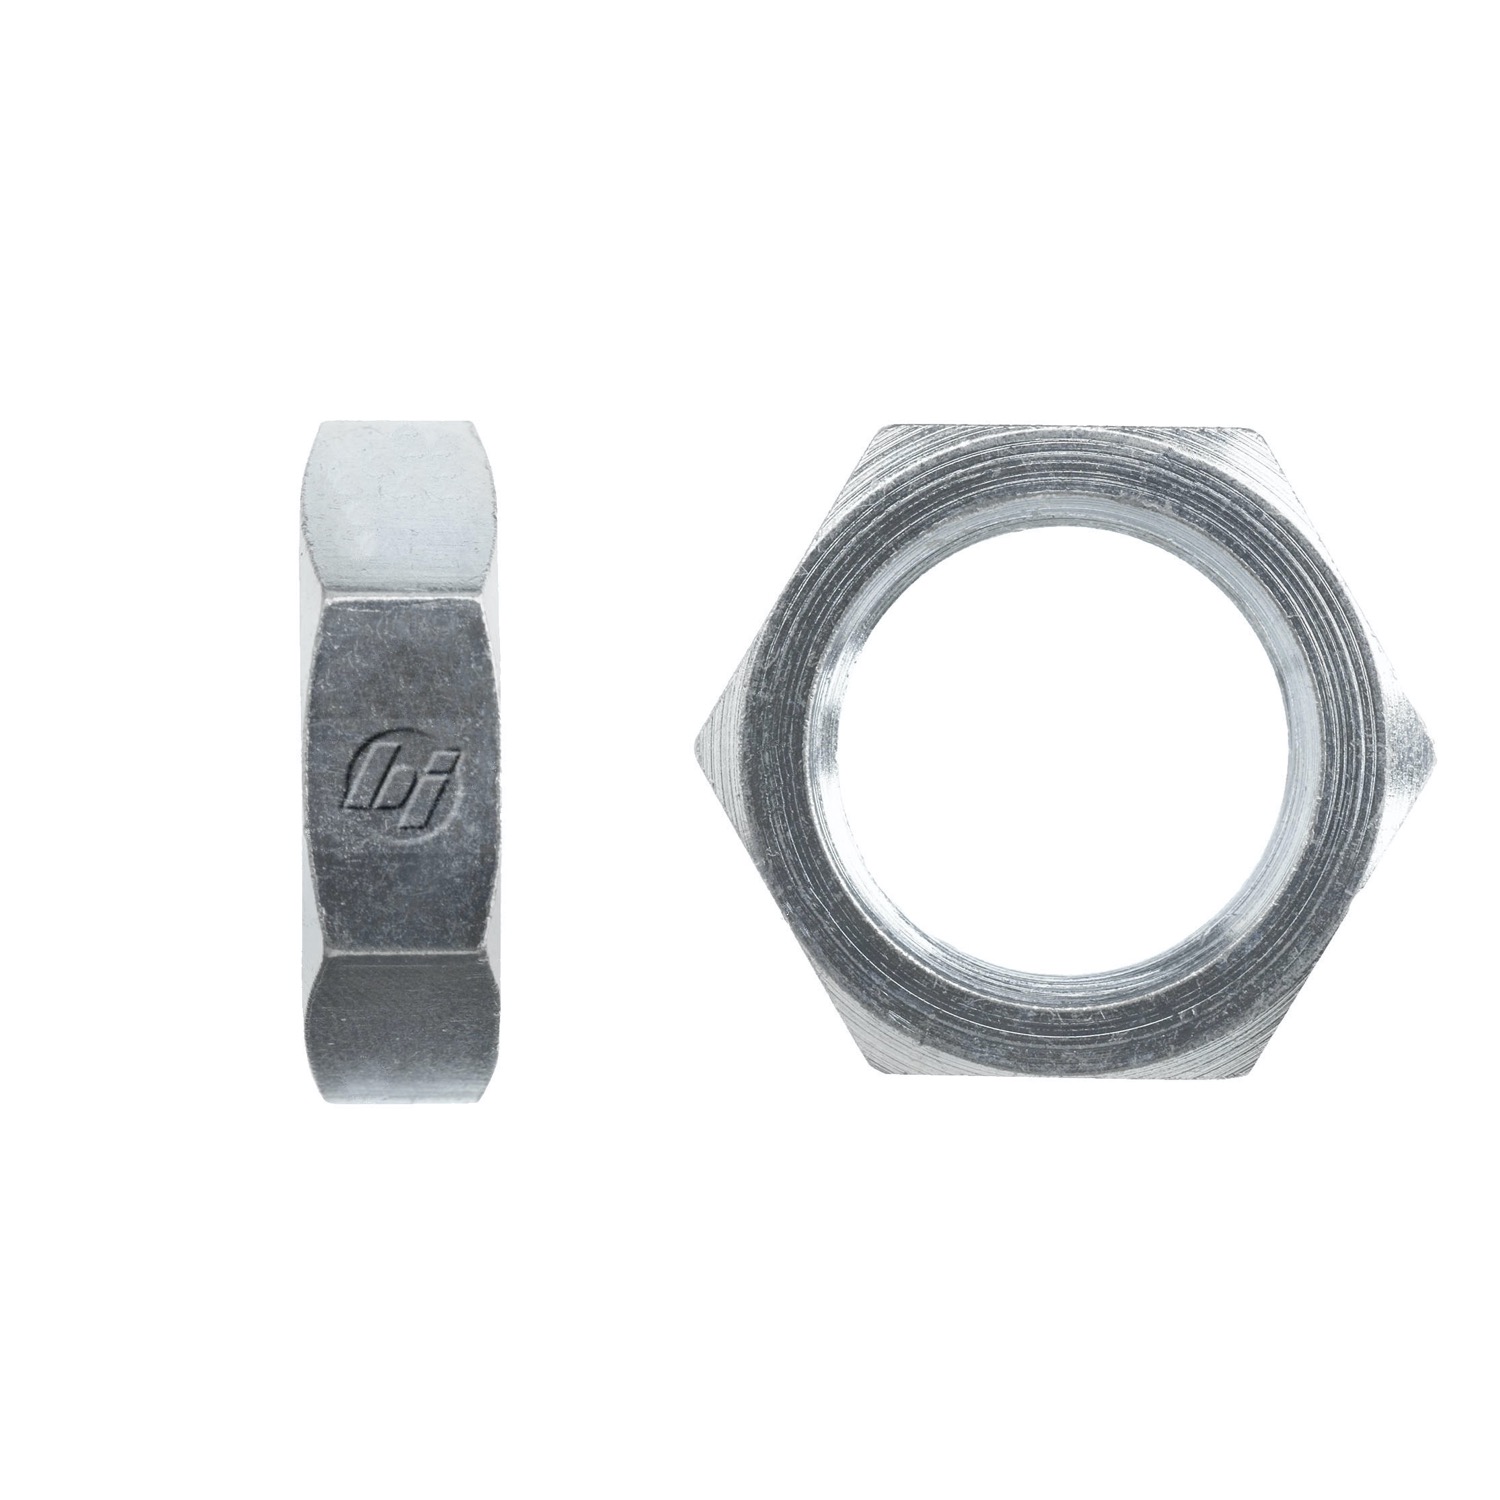 Hydraulic Hose Adapters - Nut Fitting, 0306 Series